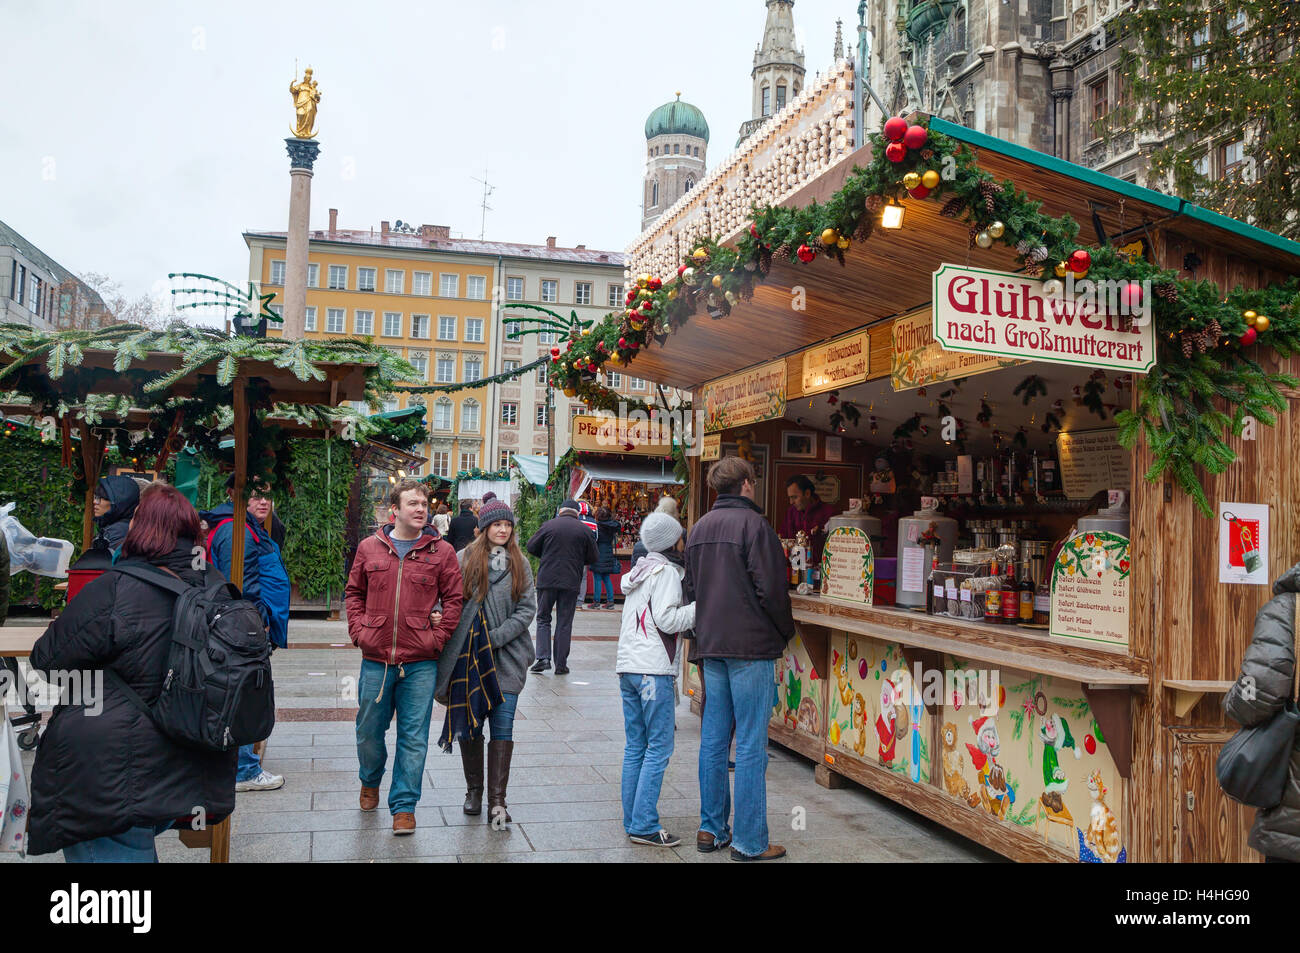 MUNICH - NOVEMBER 30: Marienplatz with people on November 30, 2015 in Munich. It's the 3rd largest city in Germany. Stock Photo